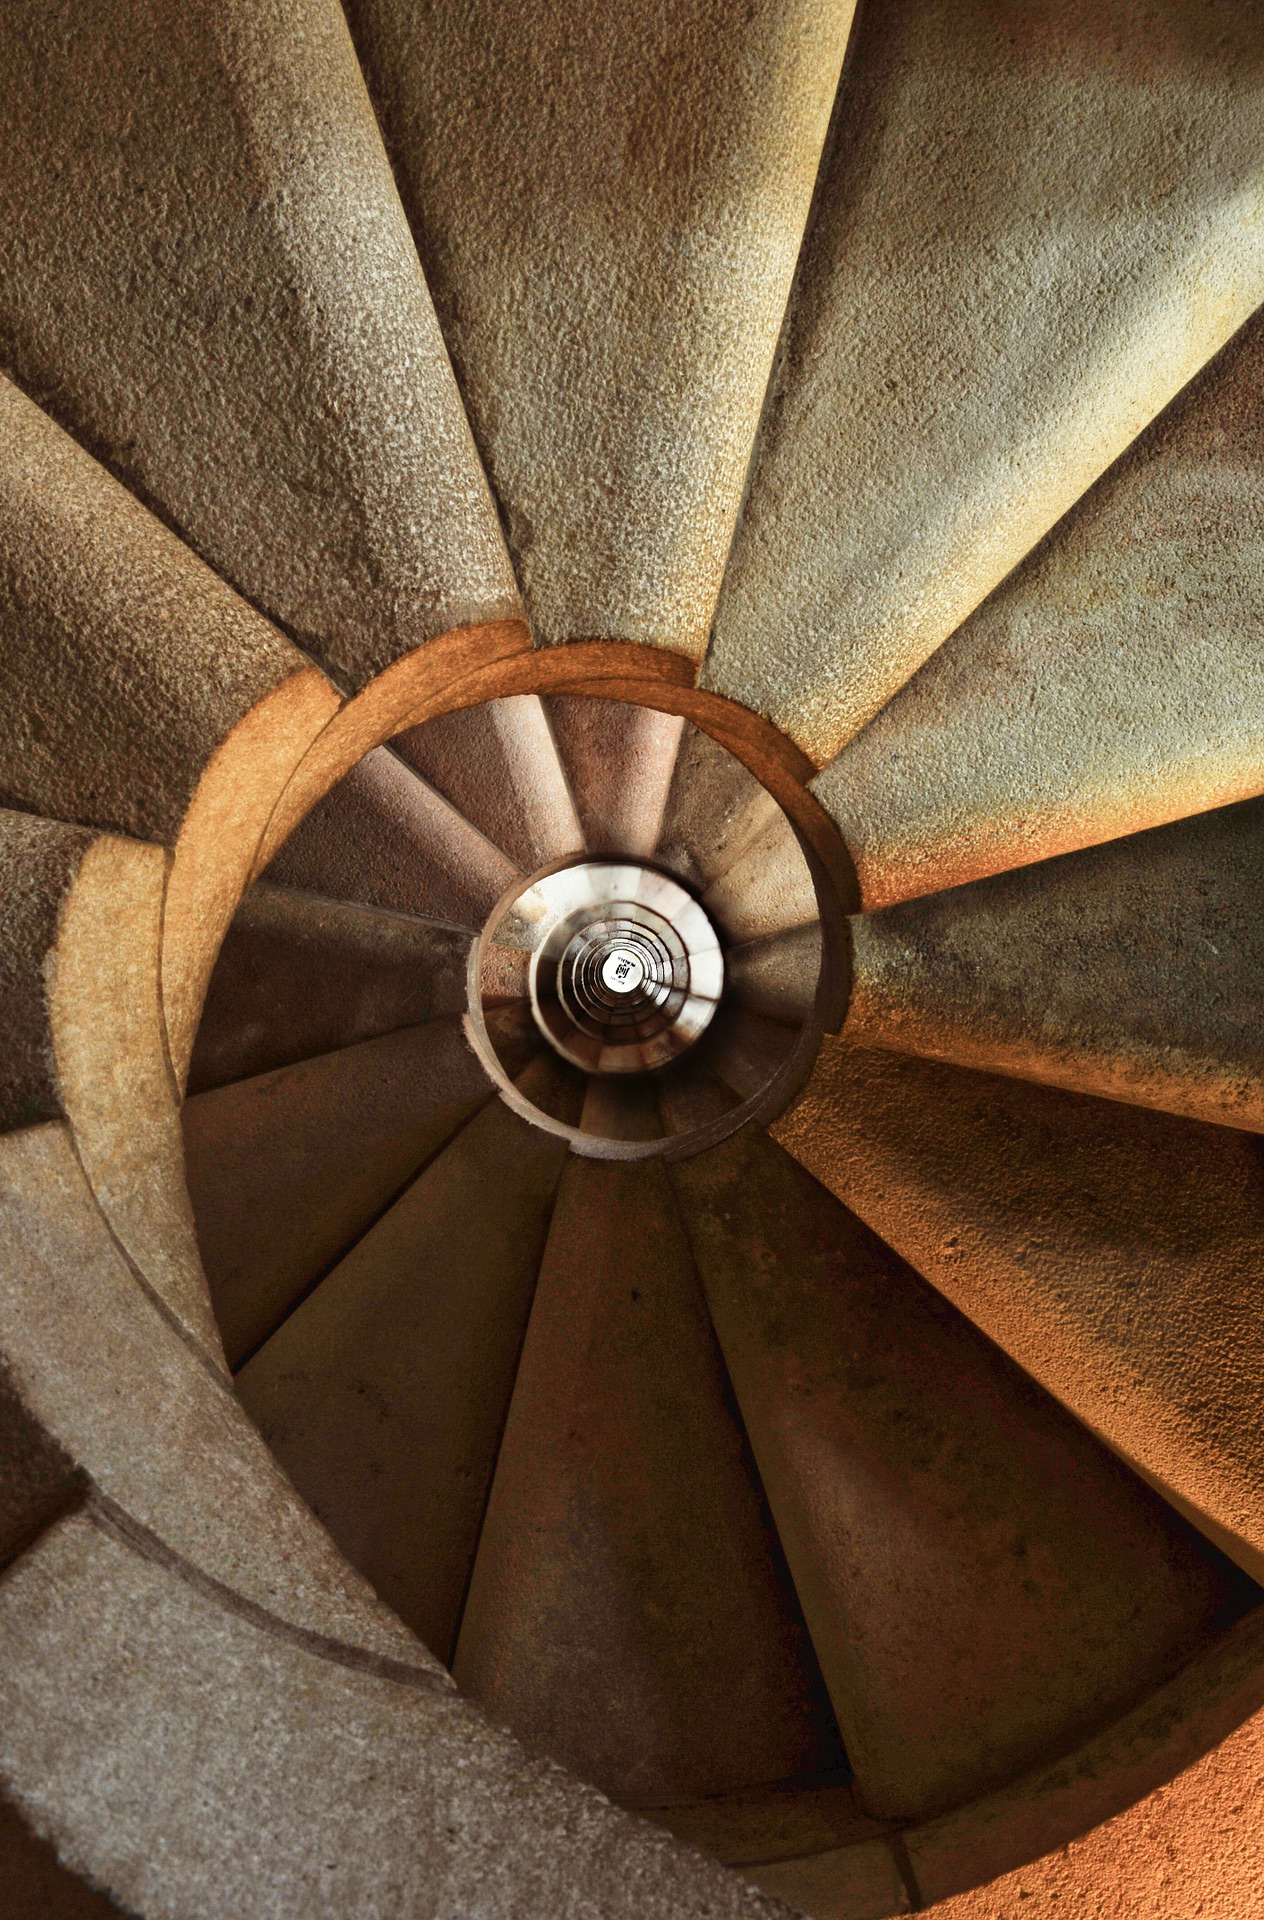 staircase-g54ed46875_1920